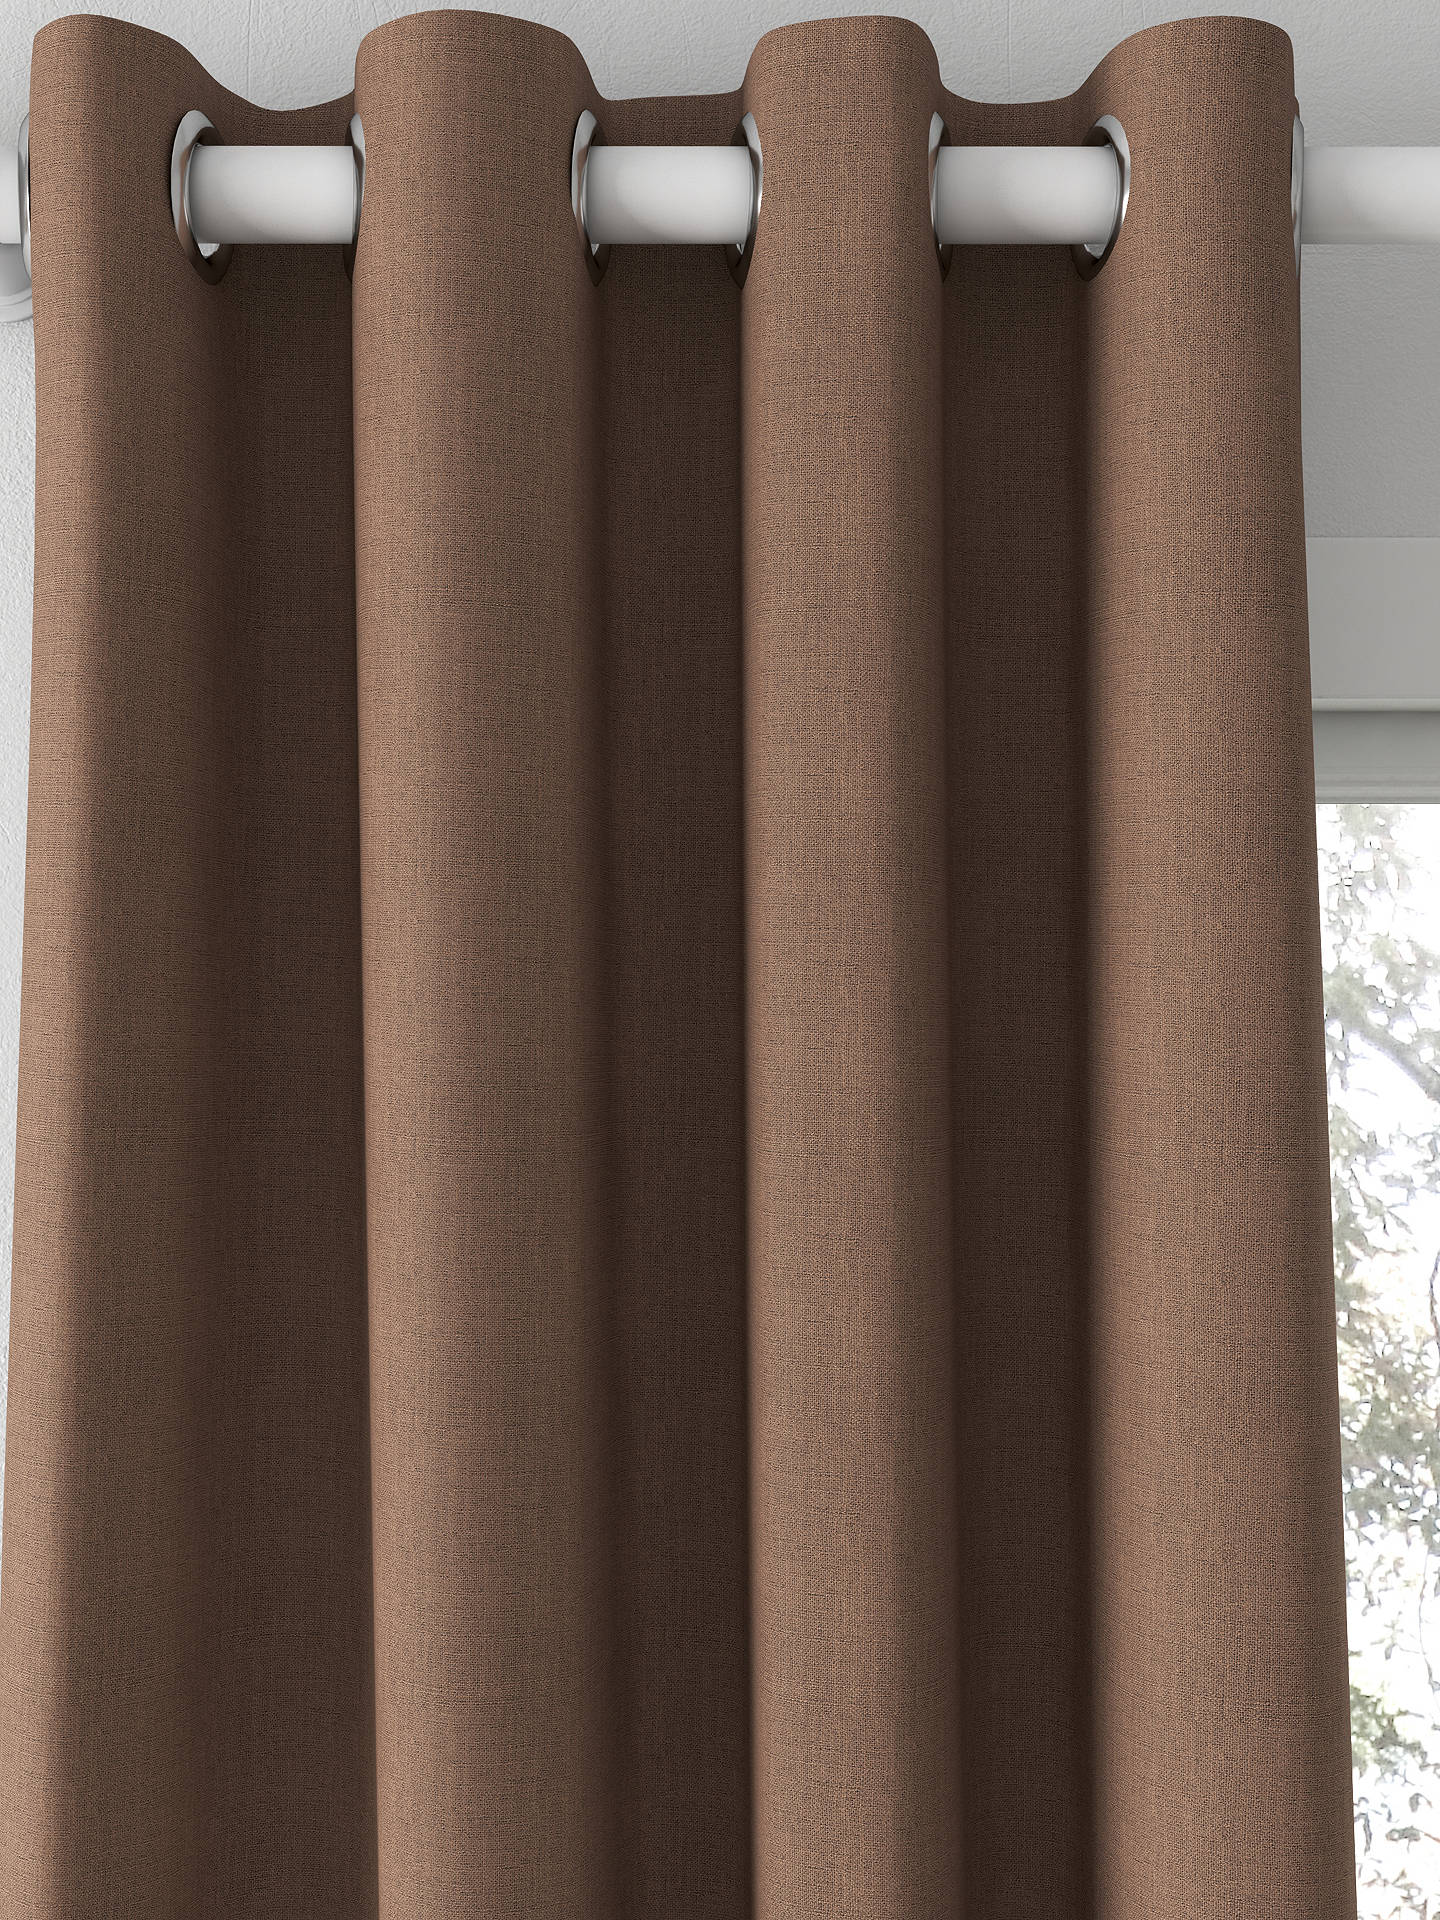 Sanderson Lagom Made to Measure Curtains, Earth